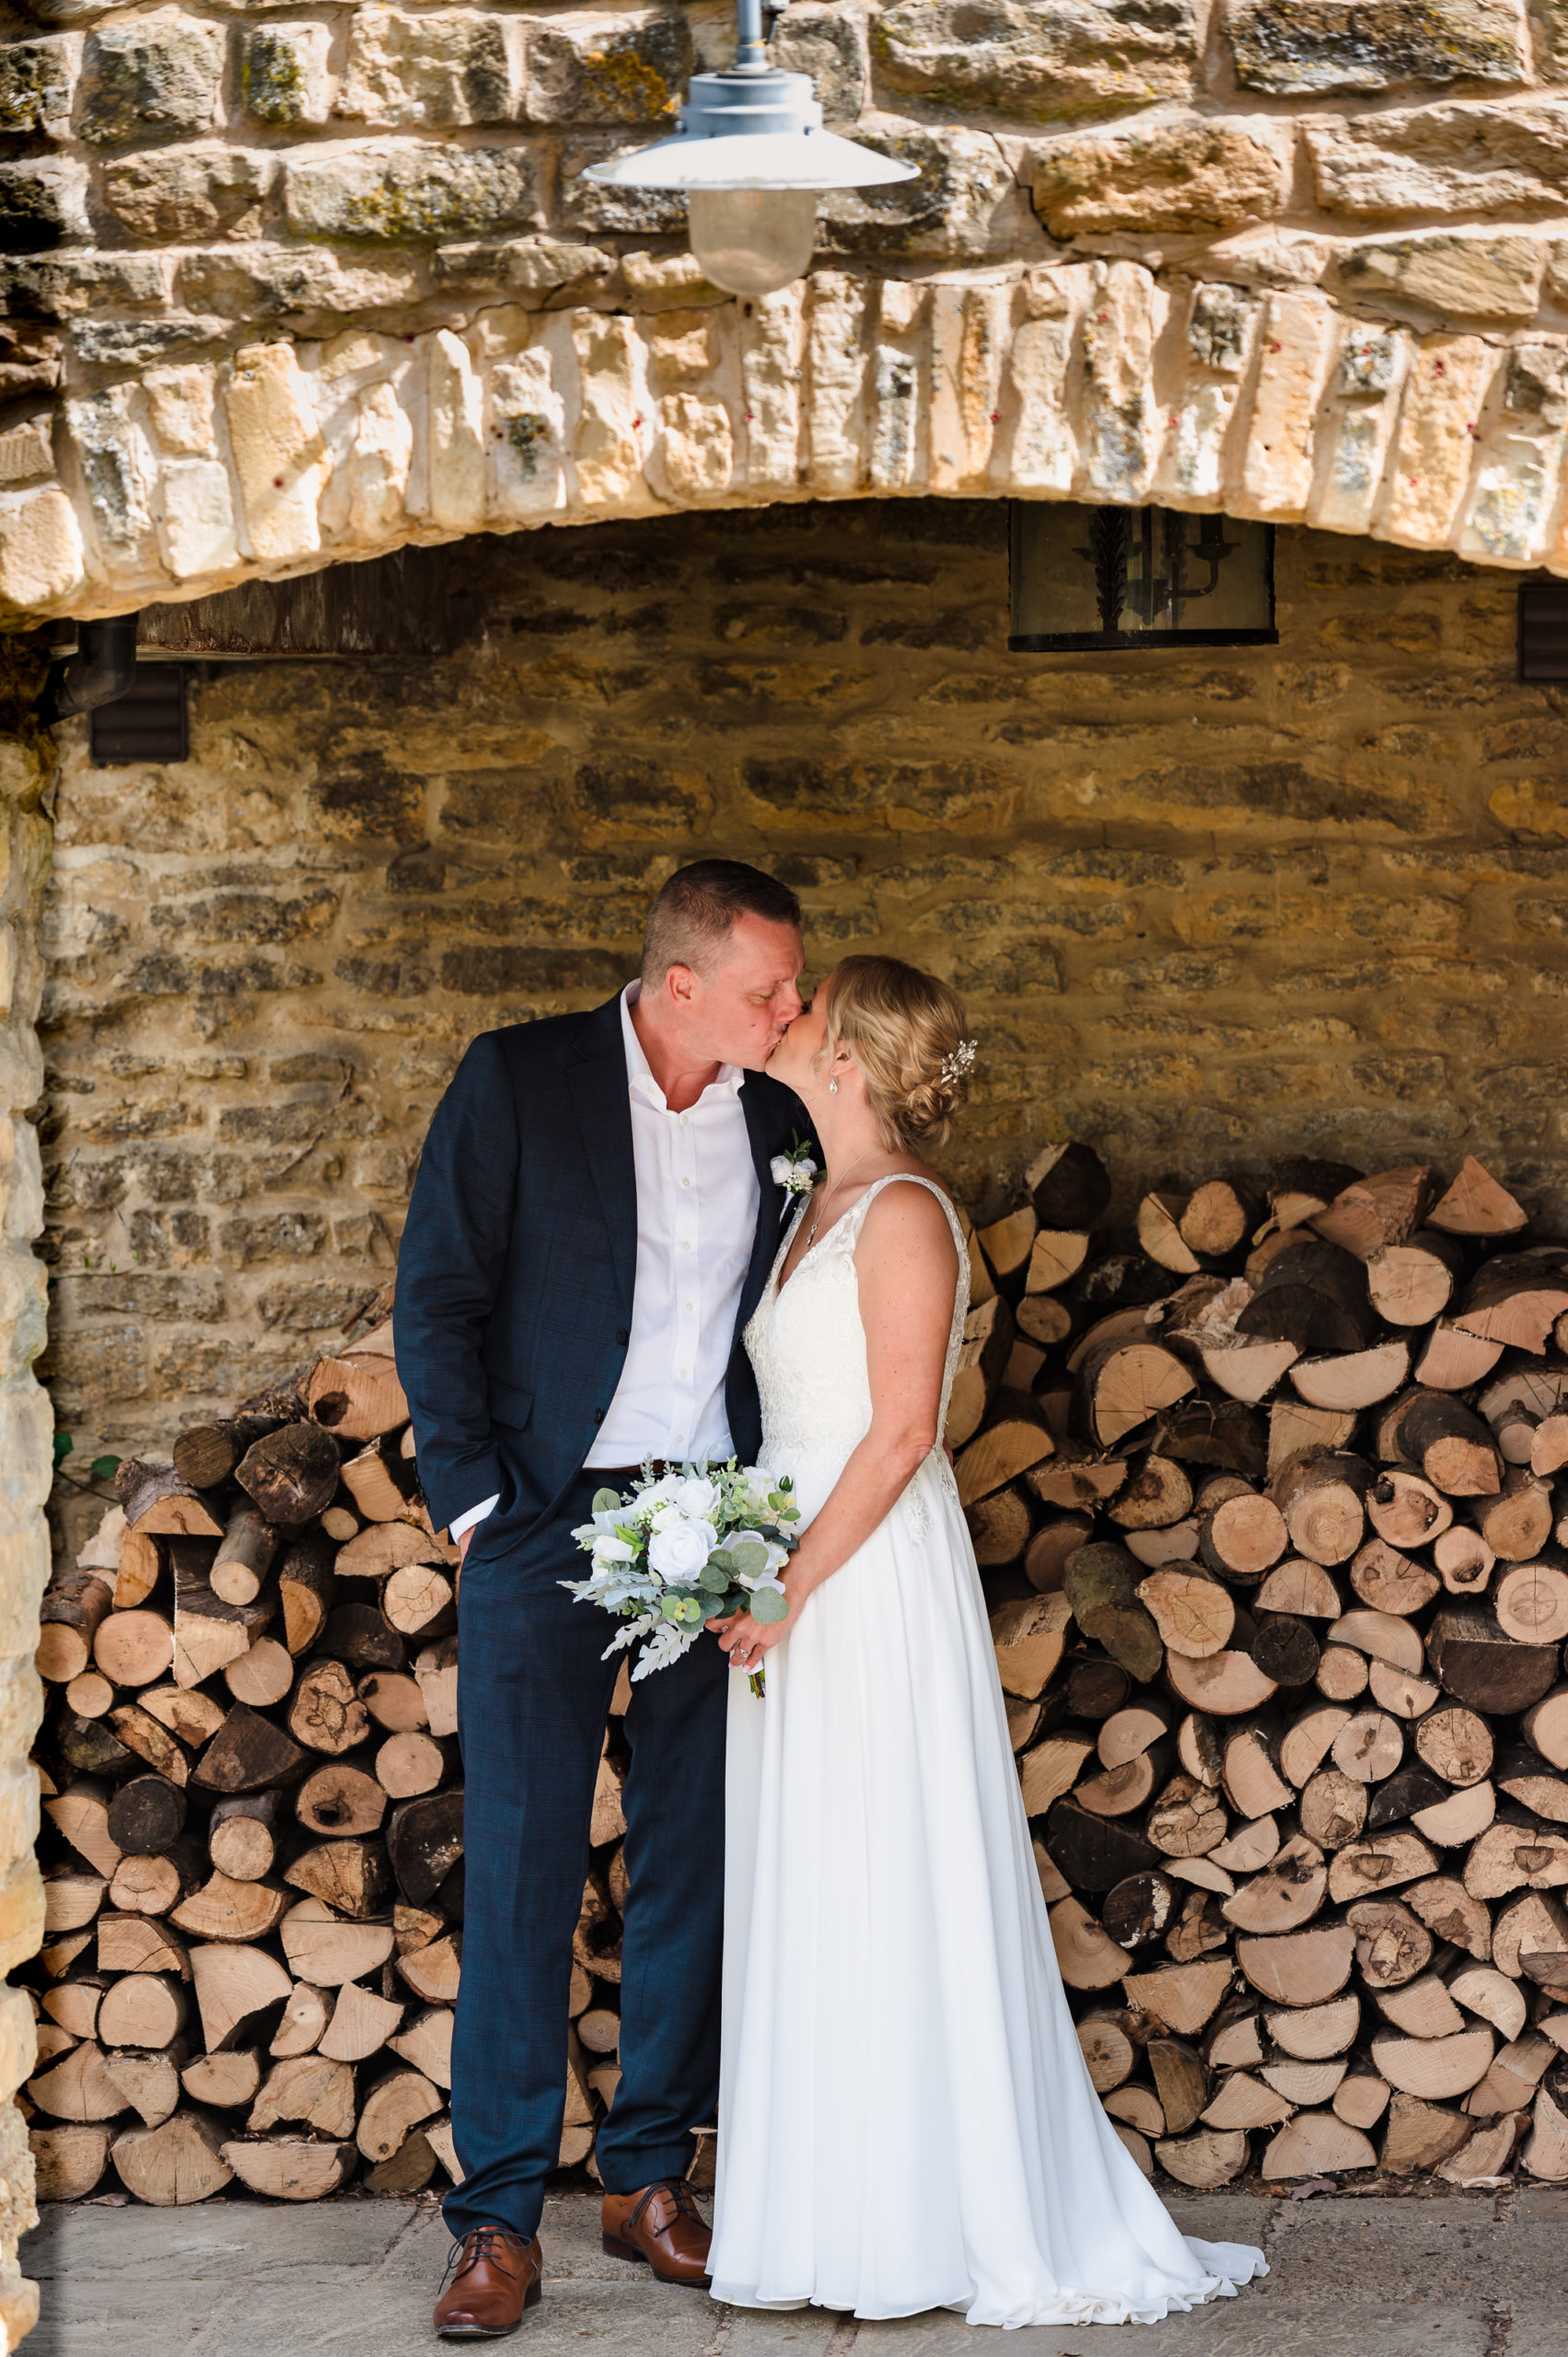 wedding day portraits at barnsdale gardens